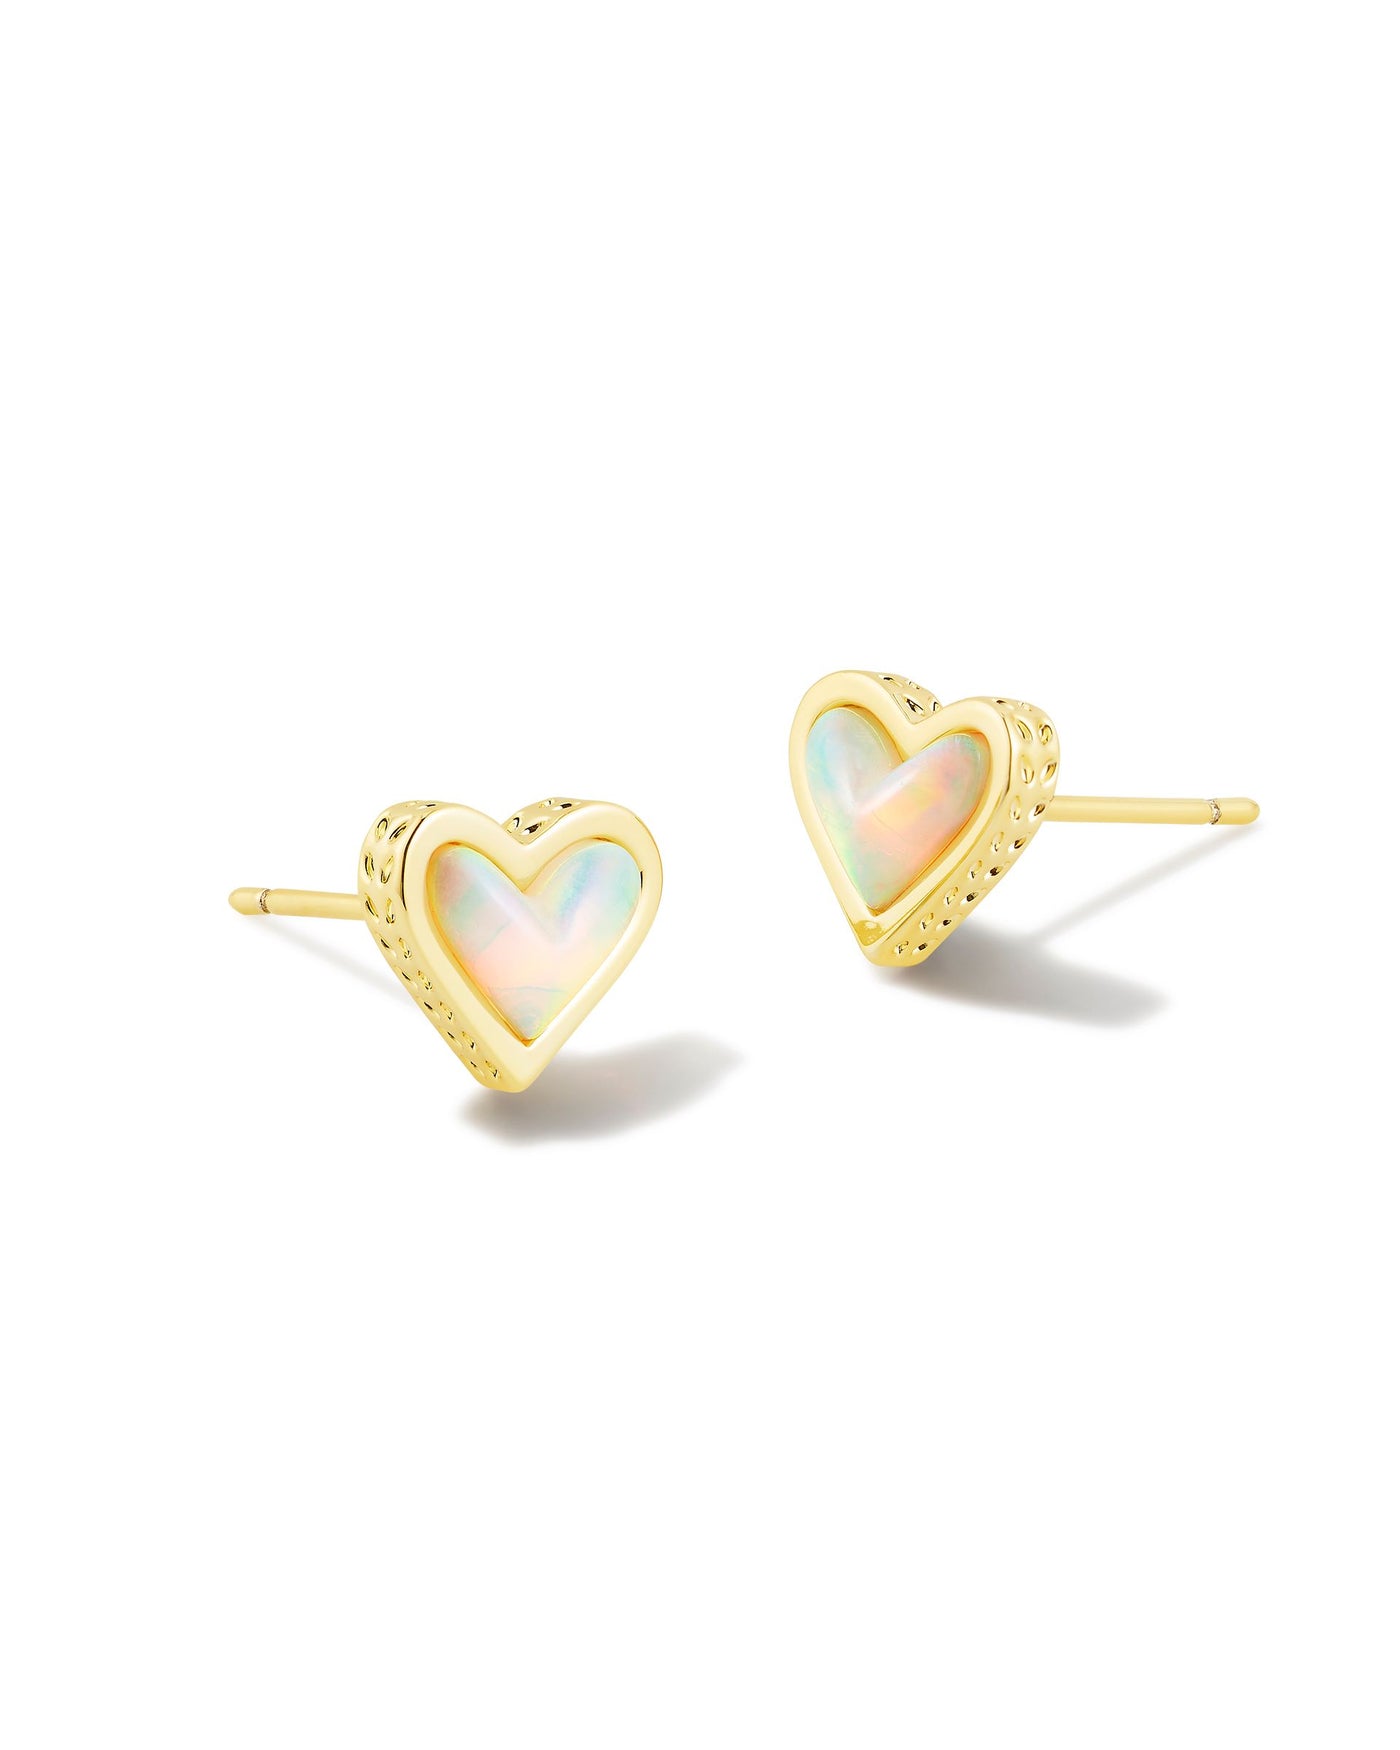 Kendra Scott Framed Ari Heart Stud Earrings in Gold White Opalescent Resin-Earrings-Kendra Scott-Market Street Nest, Fashionable Clothing, Shoes and Home Décor Located in Mabank, TX